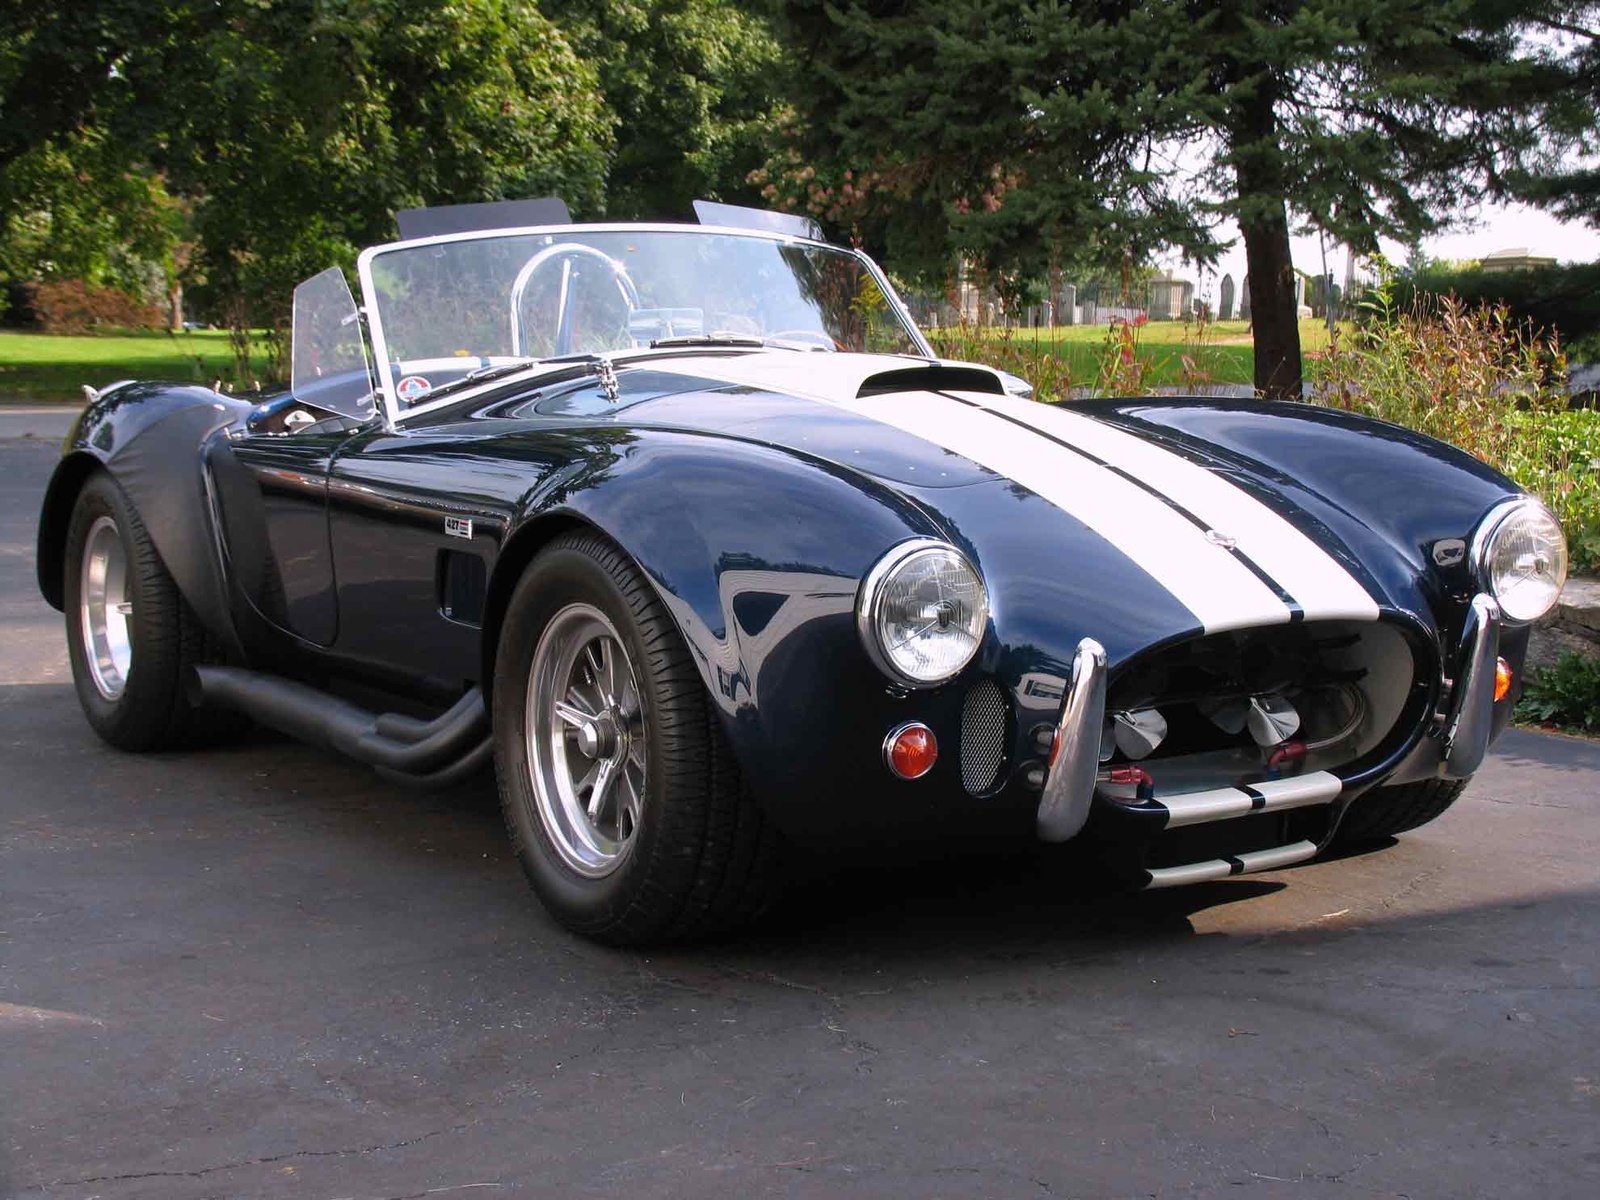 1968 Shelby Cobra - Pictures - 1968 Shelby Cobra picture - CarGurus